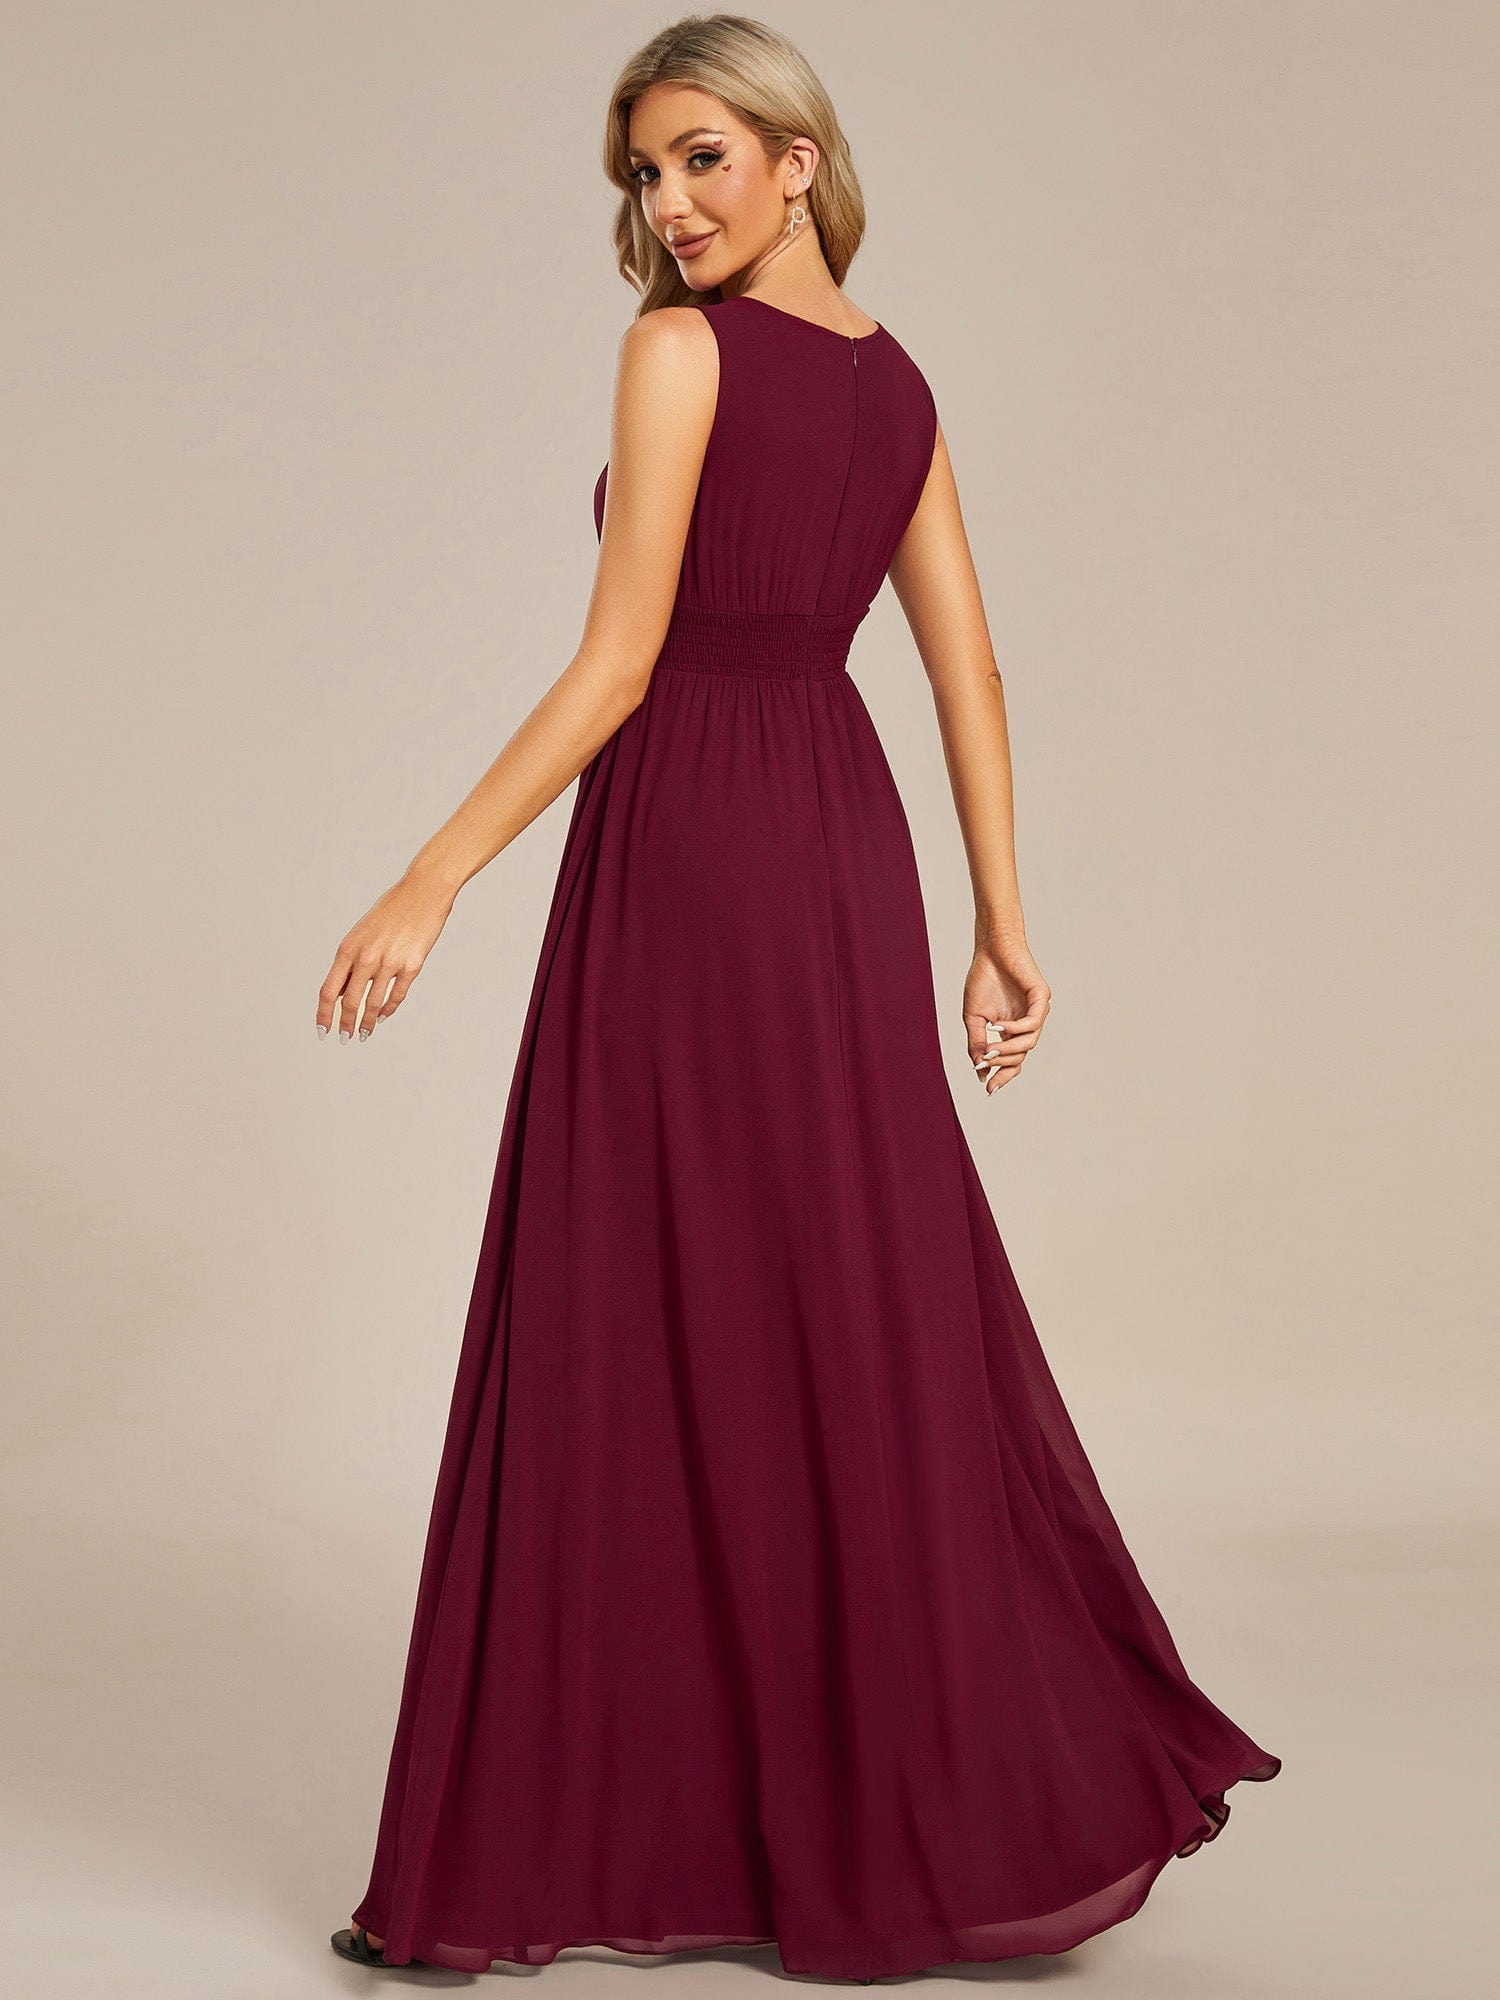 Simple Sleeveless A-line Chiffon Bridesmaid Dress with Hollow Out Detail #color_Burgundy